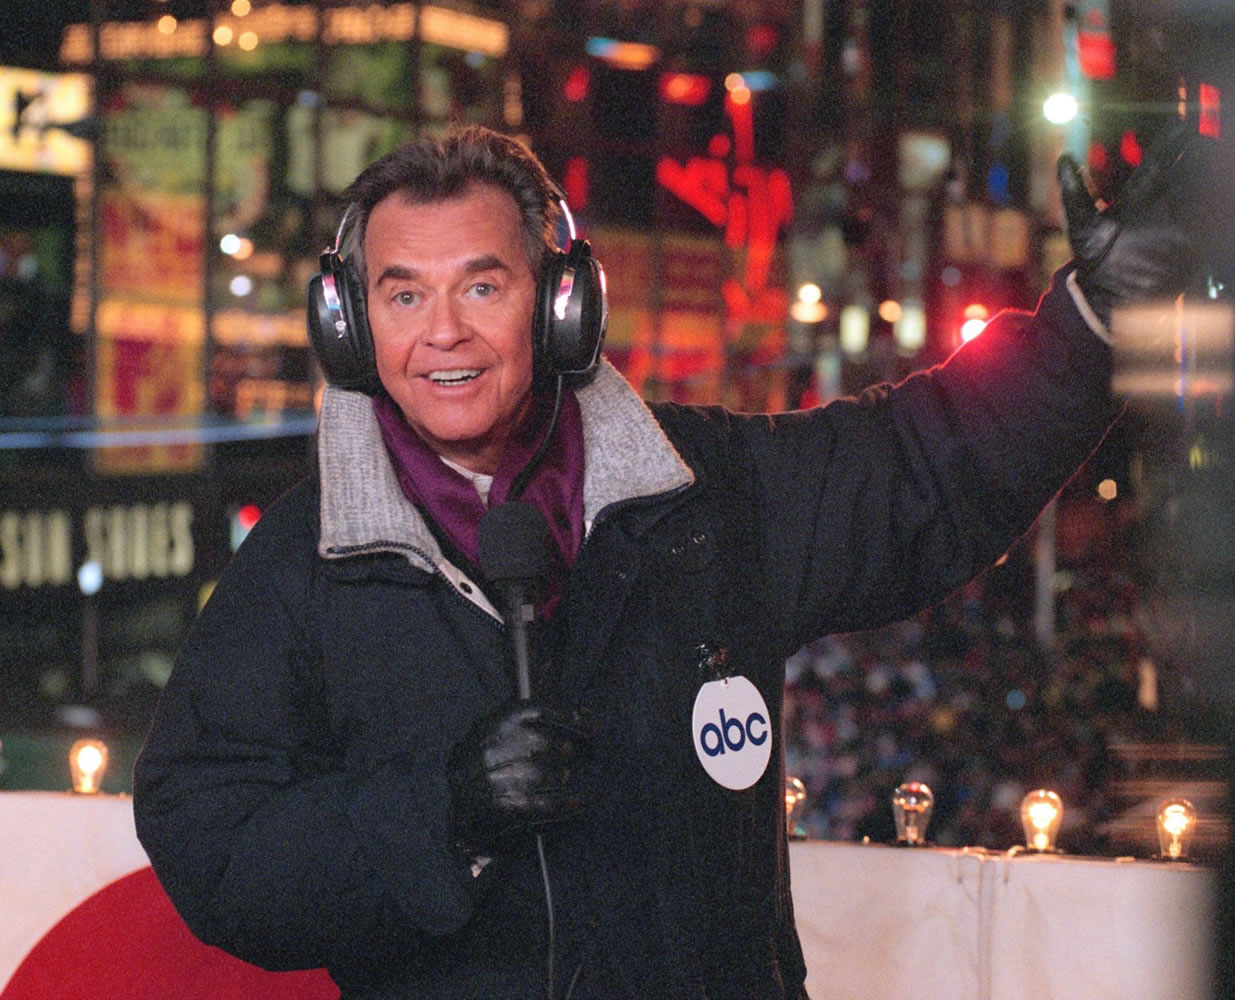 Dick Clark hosts a New Year's eve special from New York's Times Square. Clark, the television host who helped bring rock 'n' roll into the mainstream on &quot;American Bandstand,&quot; has died. He was 82. Spokesman Paul Shefrin says Clark died but did not provide further details.